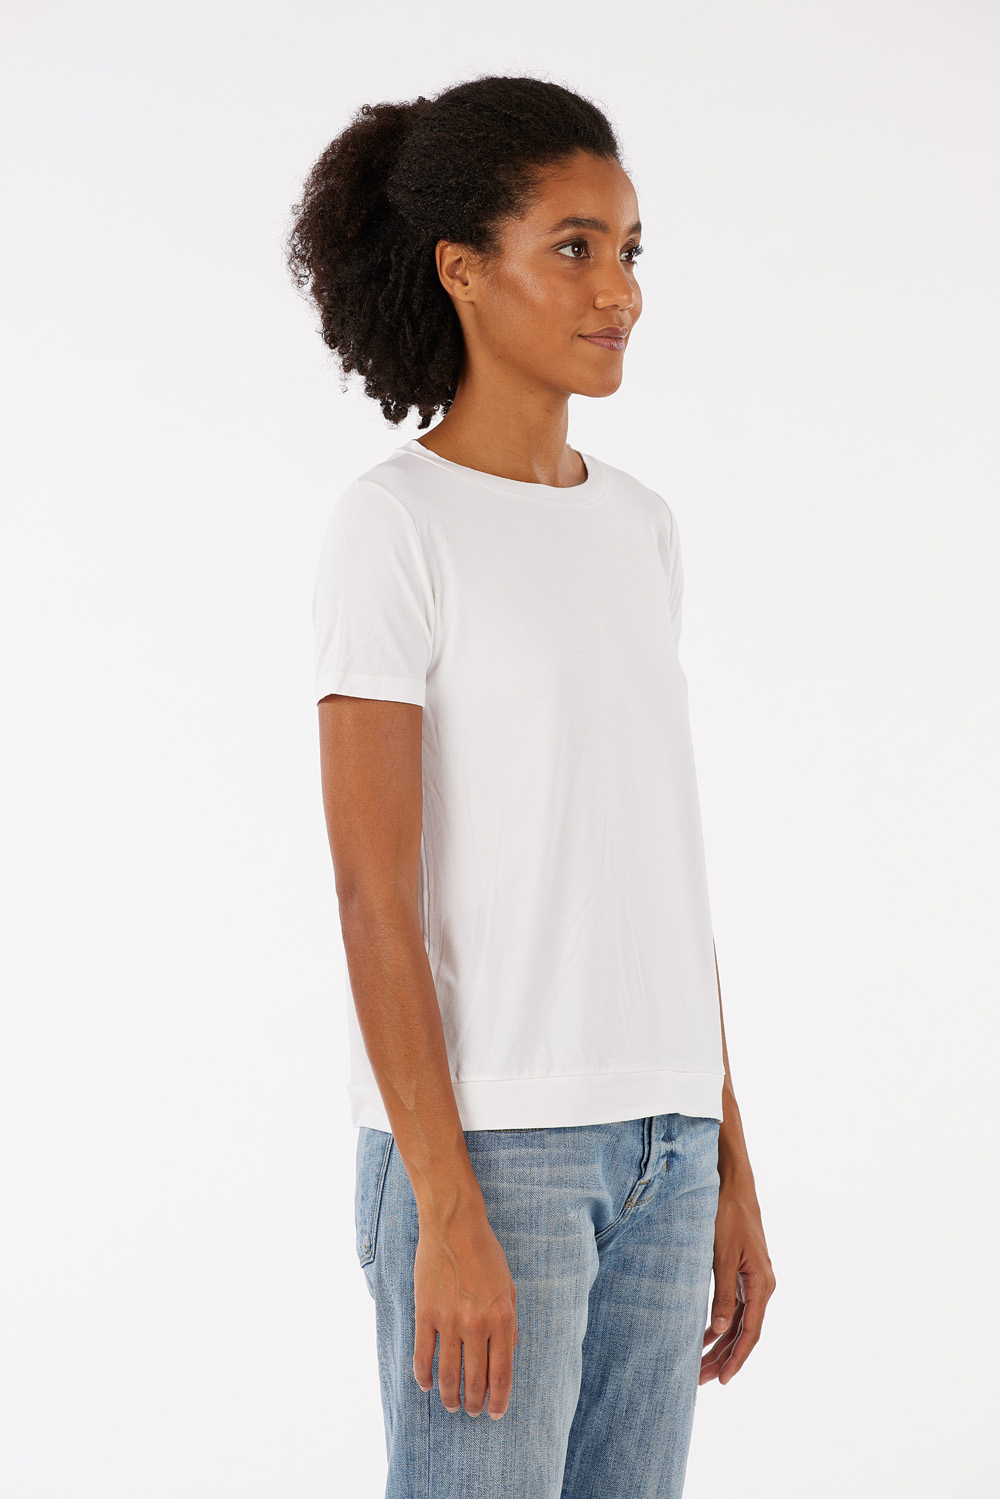 Boat neck T-shirt in microfibre jersey, short sleeve.